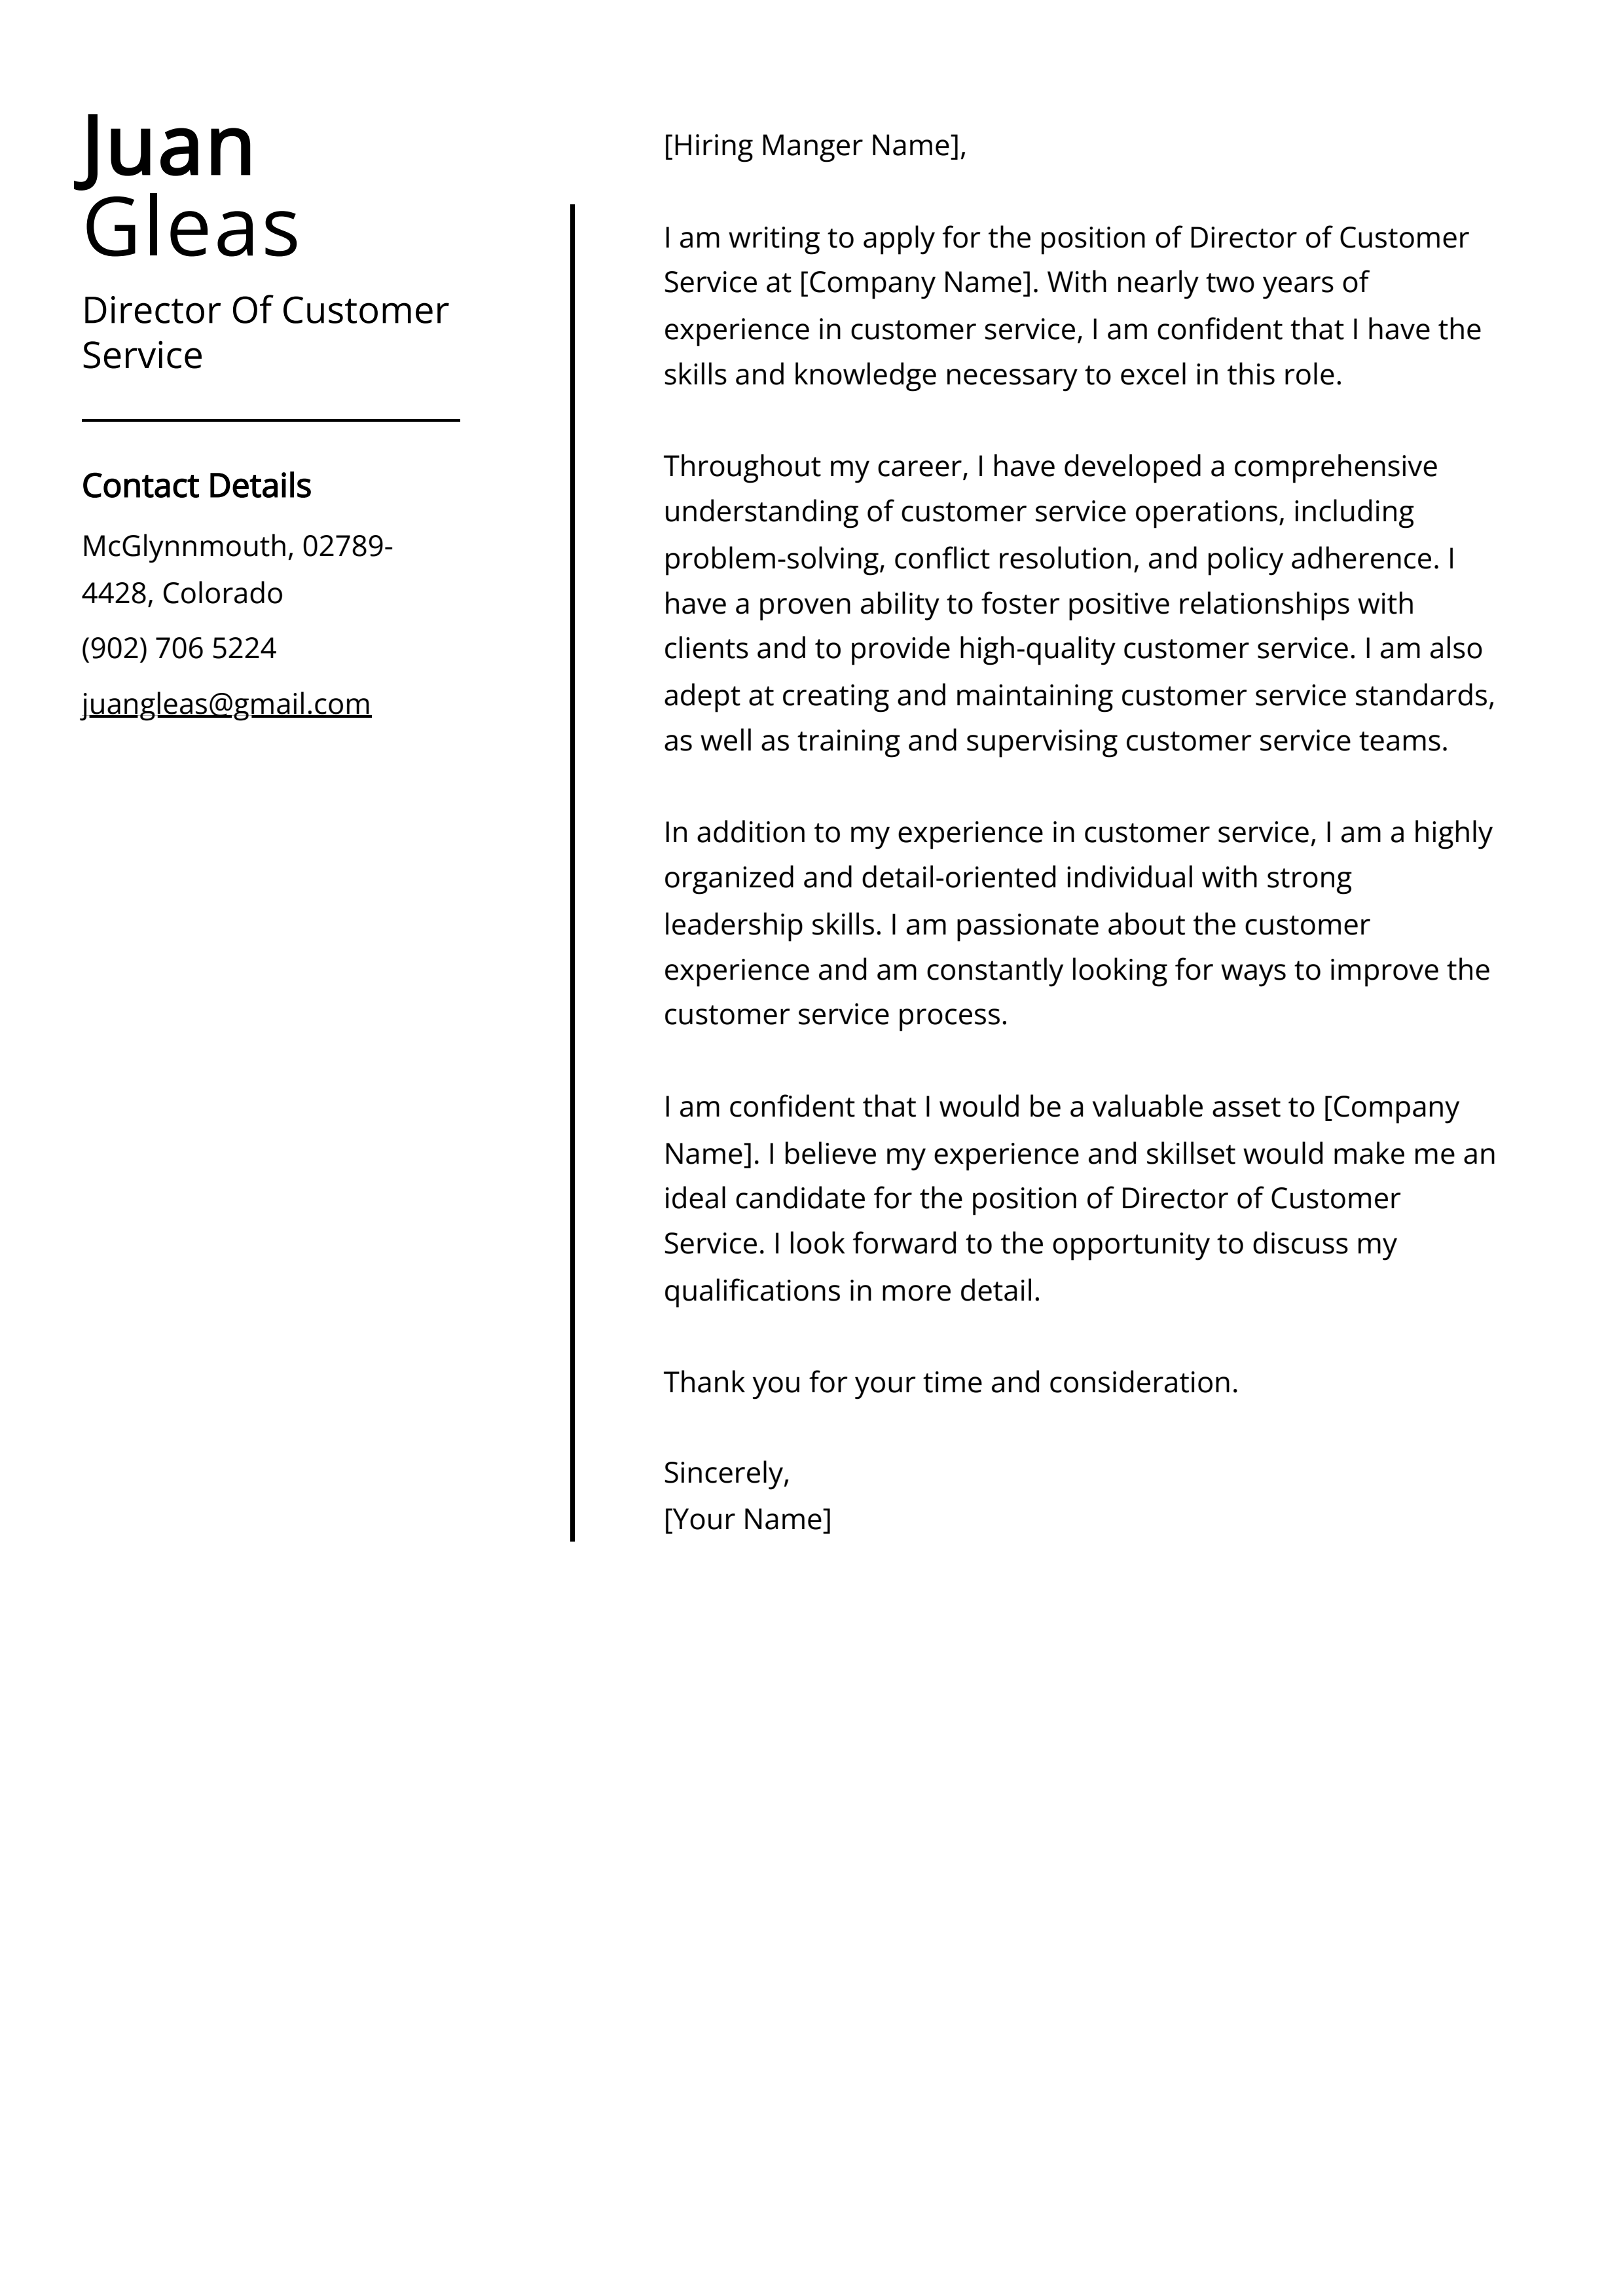 Director Of Customer Service Cover Letter Example